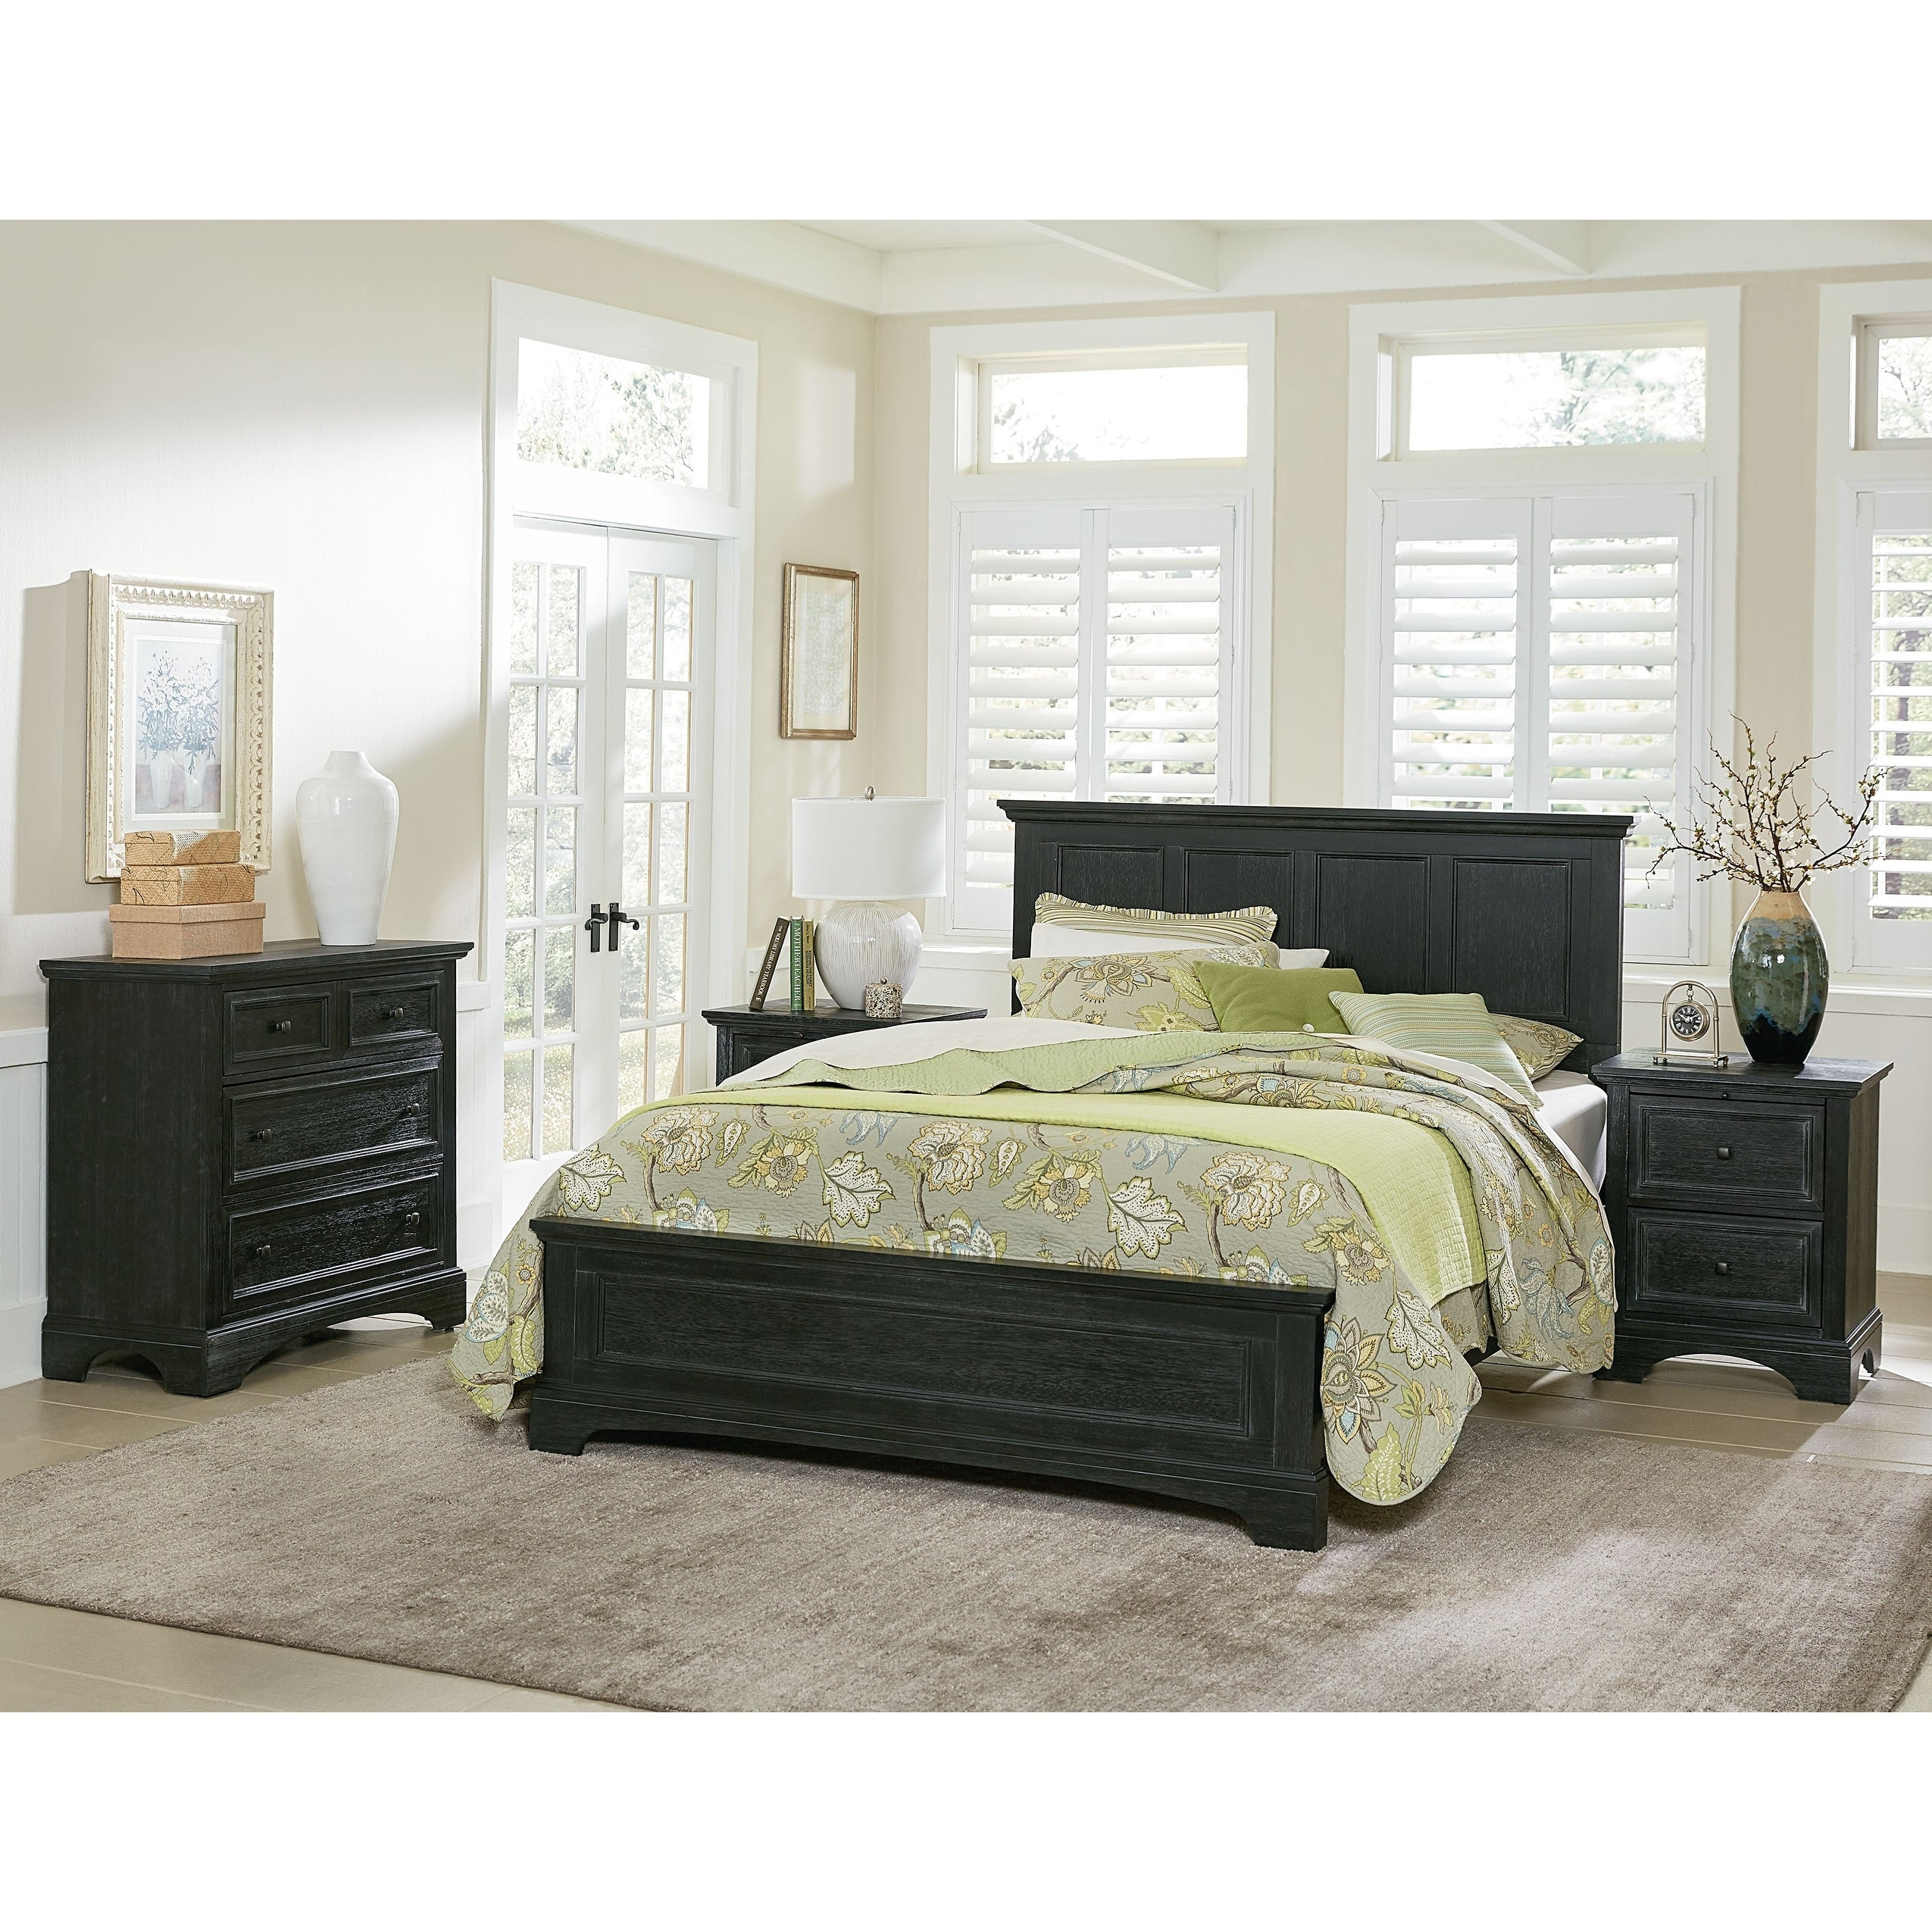 Osp Home Furnishings Farmhouse Basics King Bedroom Set With 2 Nightstands 1 Vanity And Bench And 1 Chest regarding size 2550 X 2550